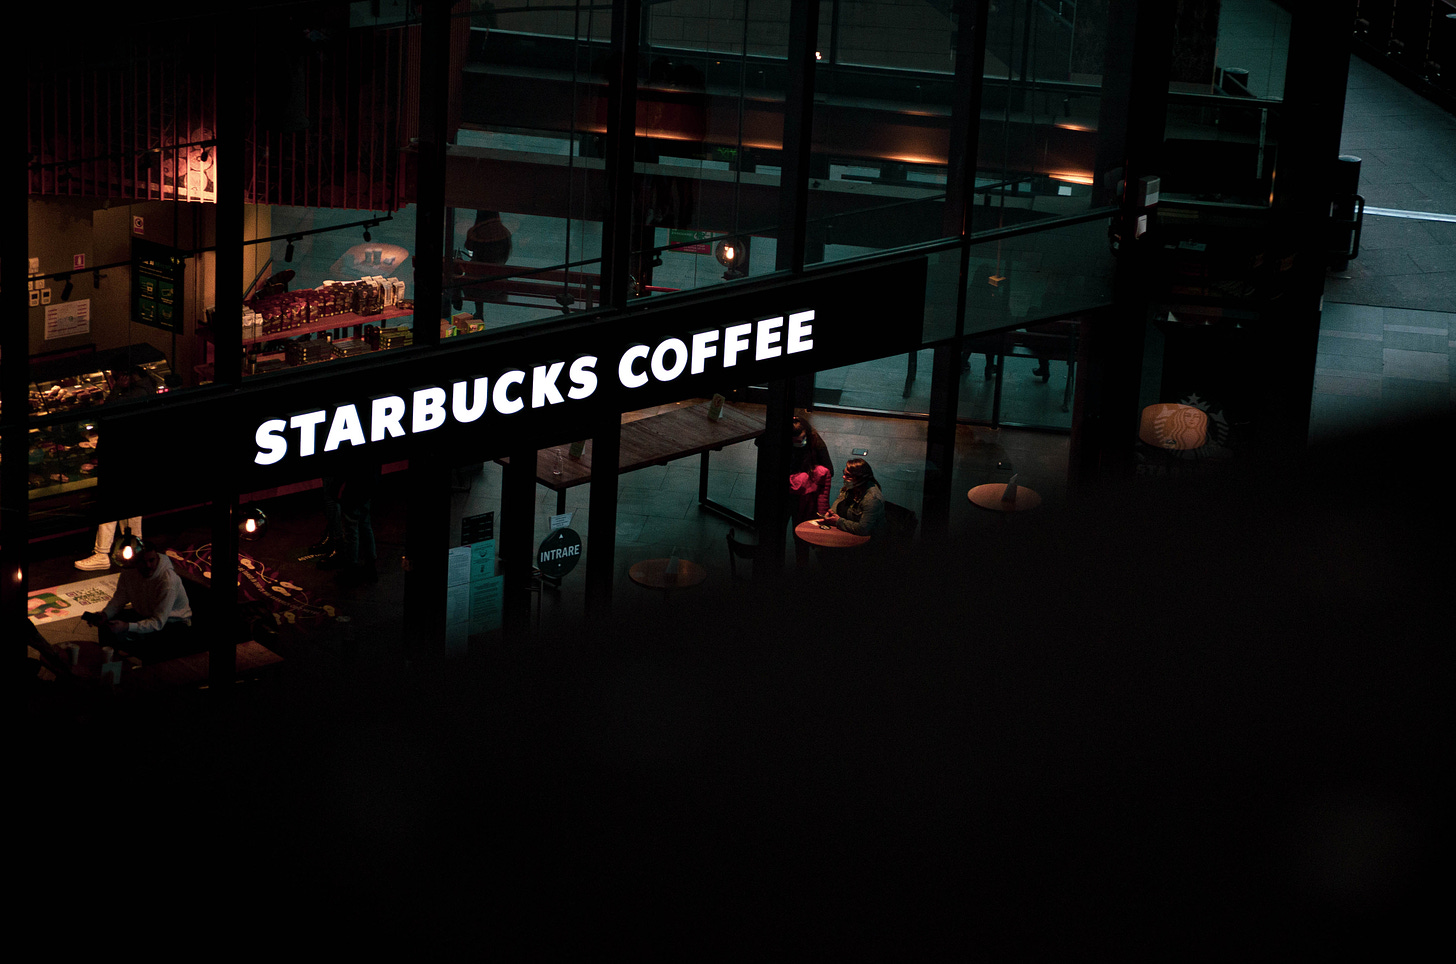 A brightly lit Starbucks cafe at night, with a dark blurred shape in the foreground